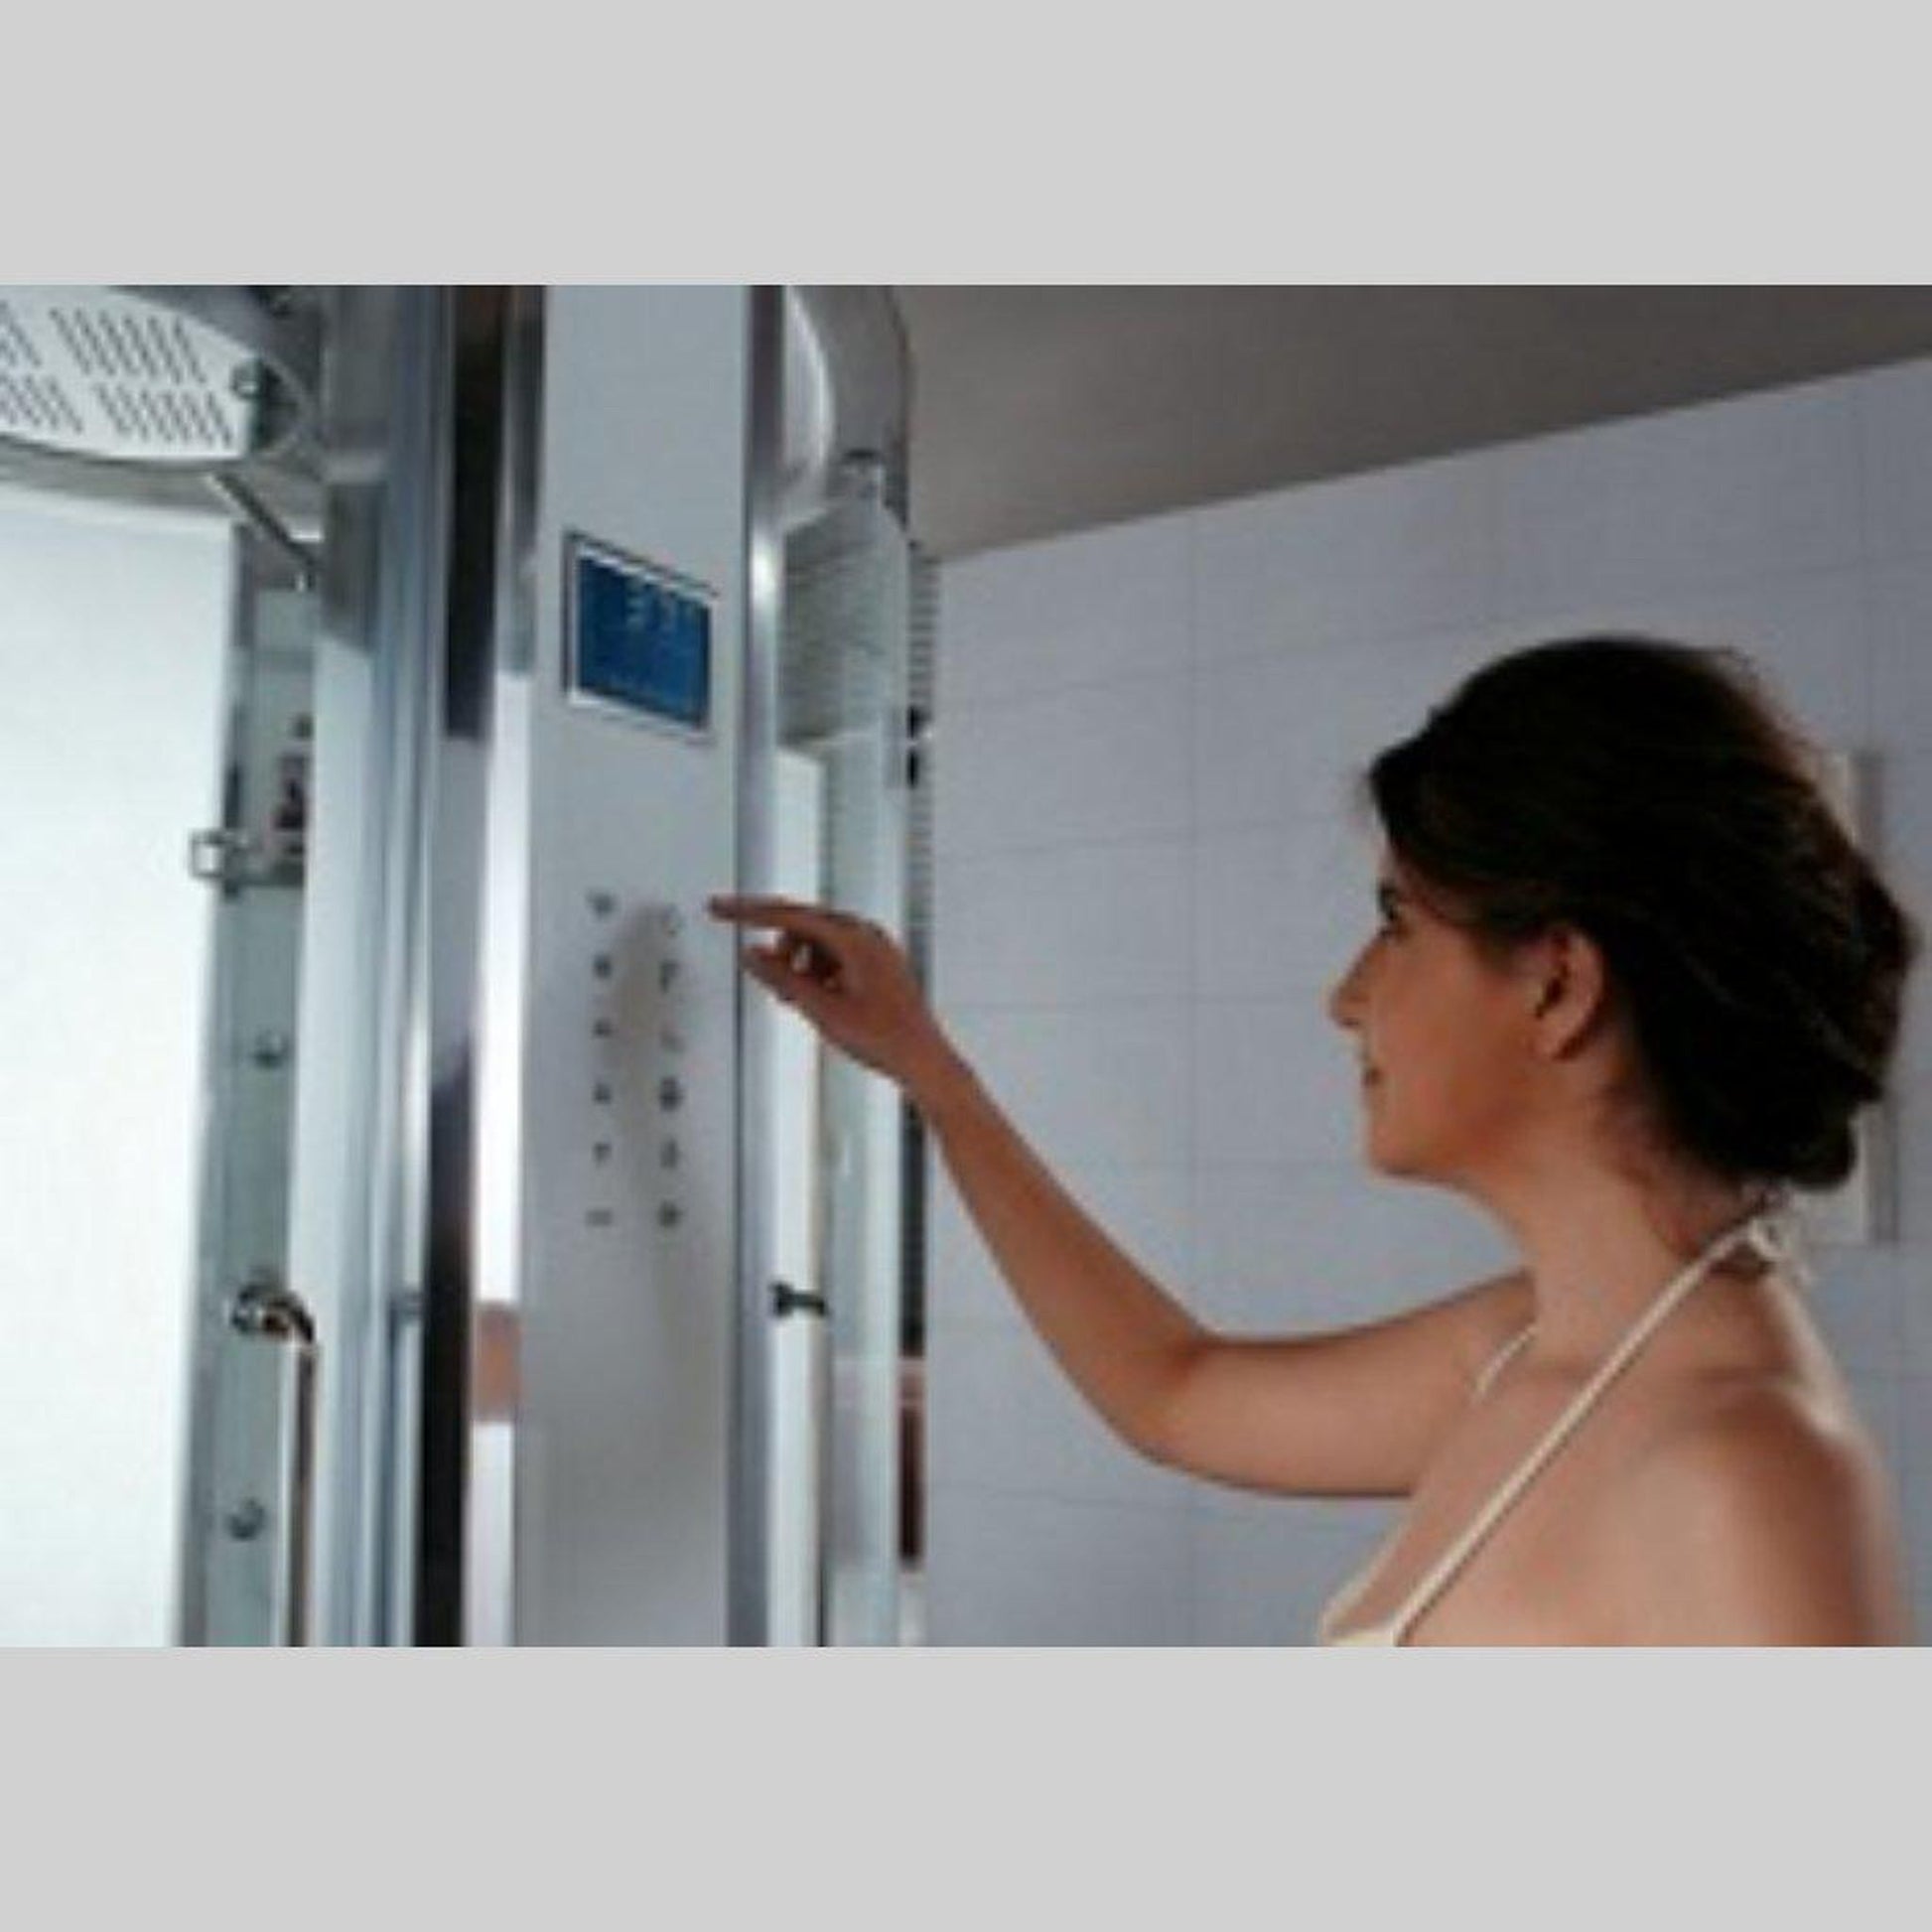 Athena 47" x 47" x 89" Two Person Corner Steam Shower With Dual Hinged Doors 12 Massage Jets & LED Chromatherapy Lighting